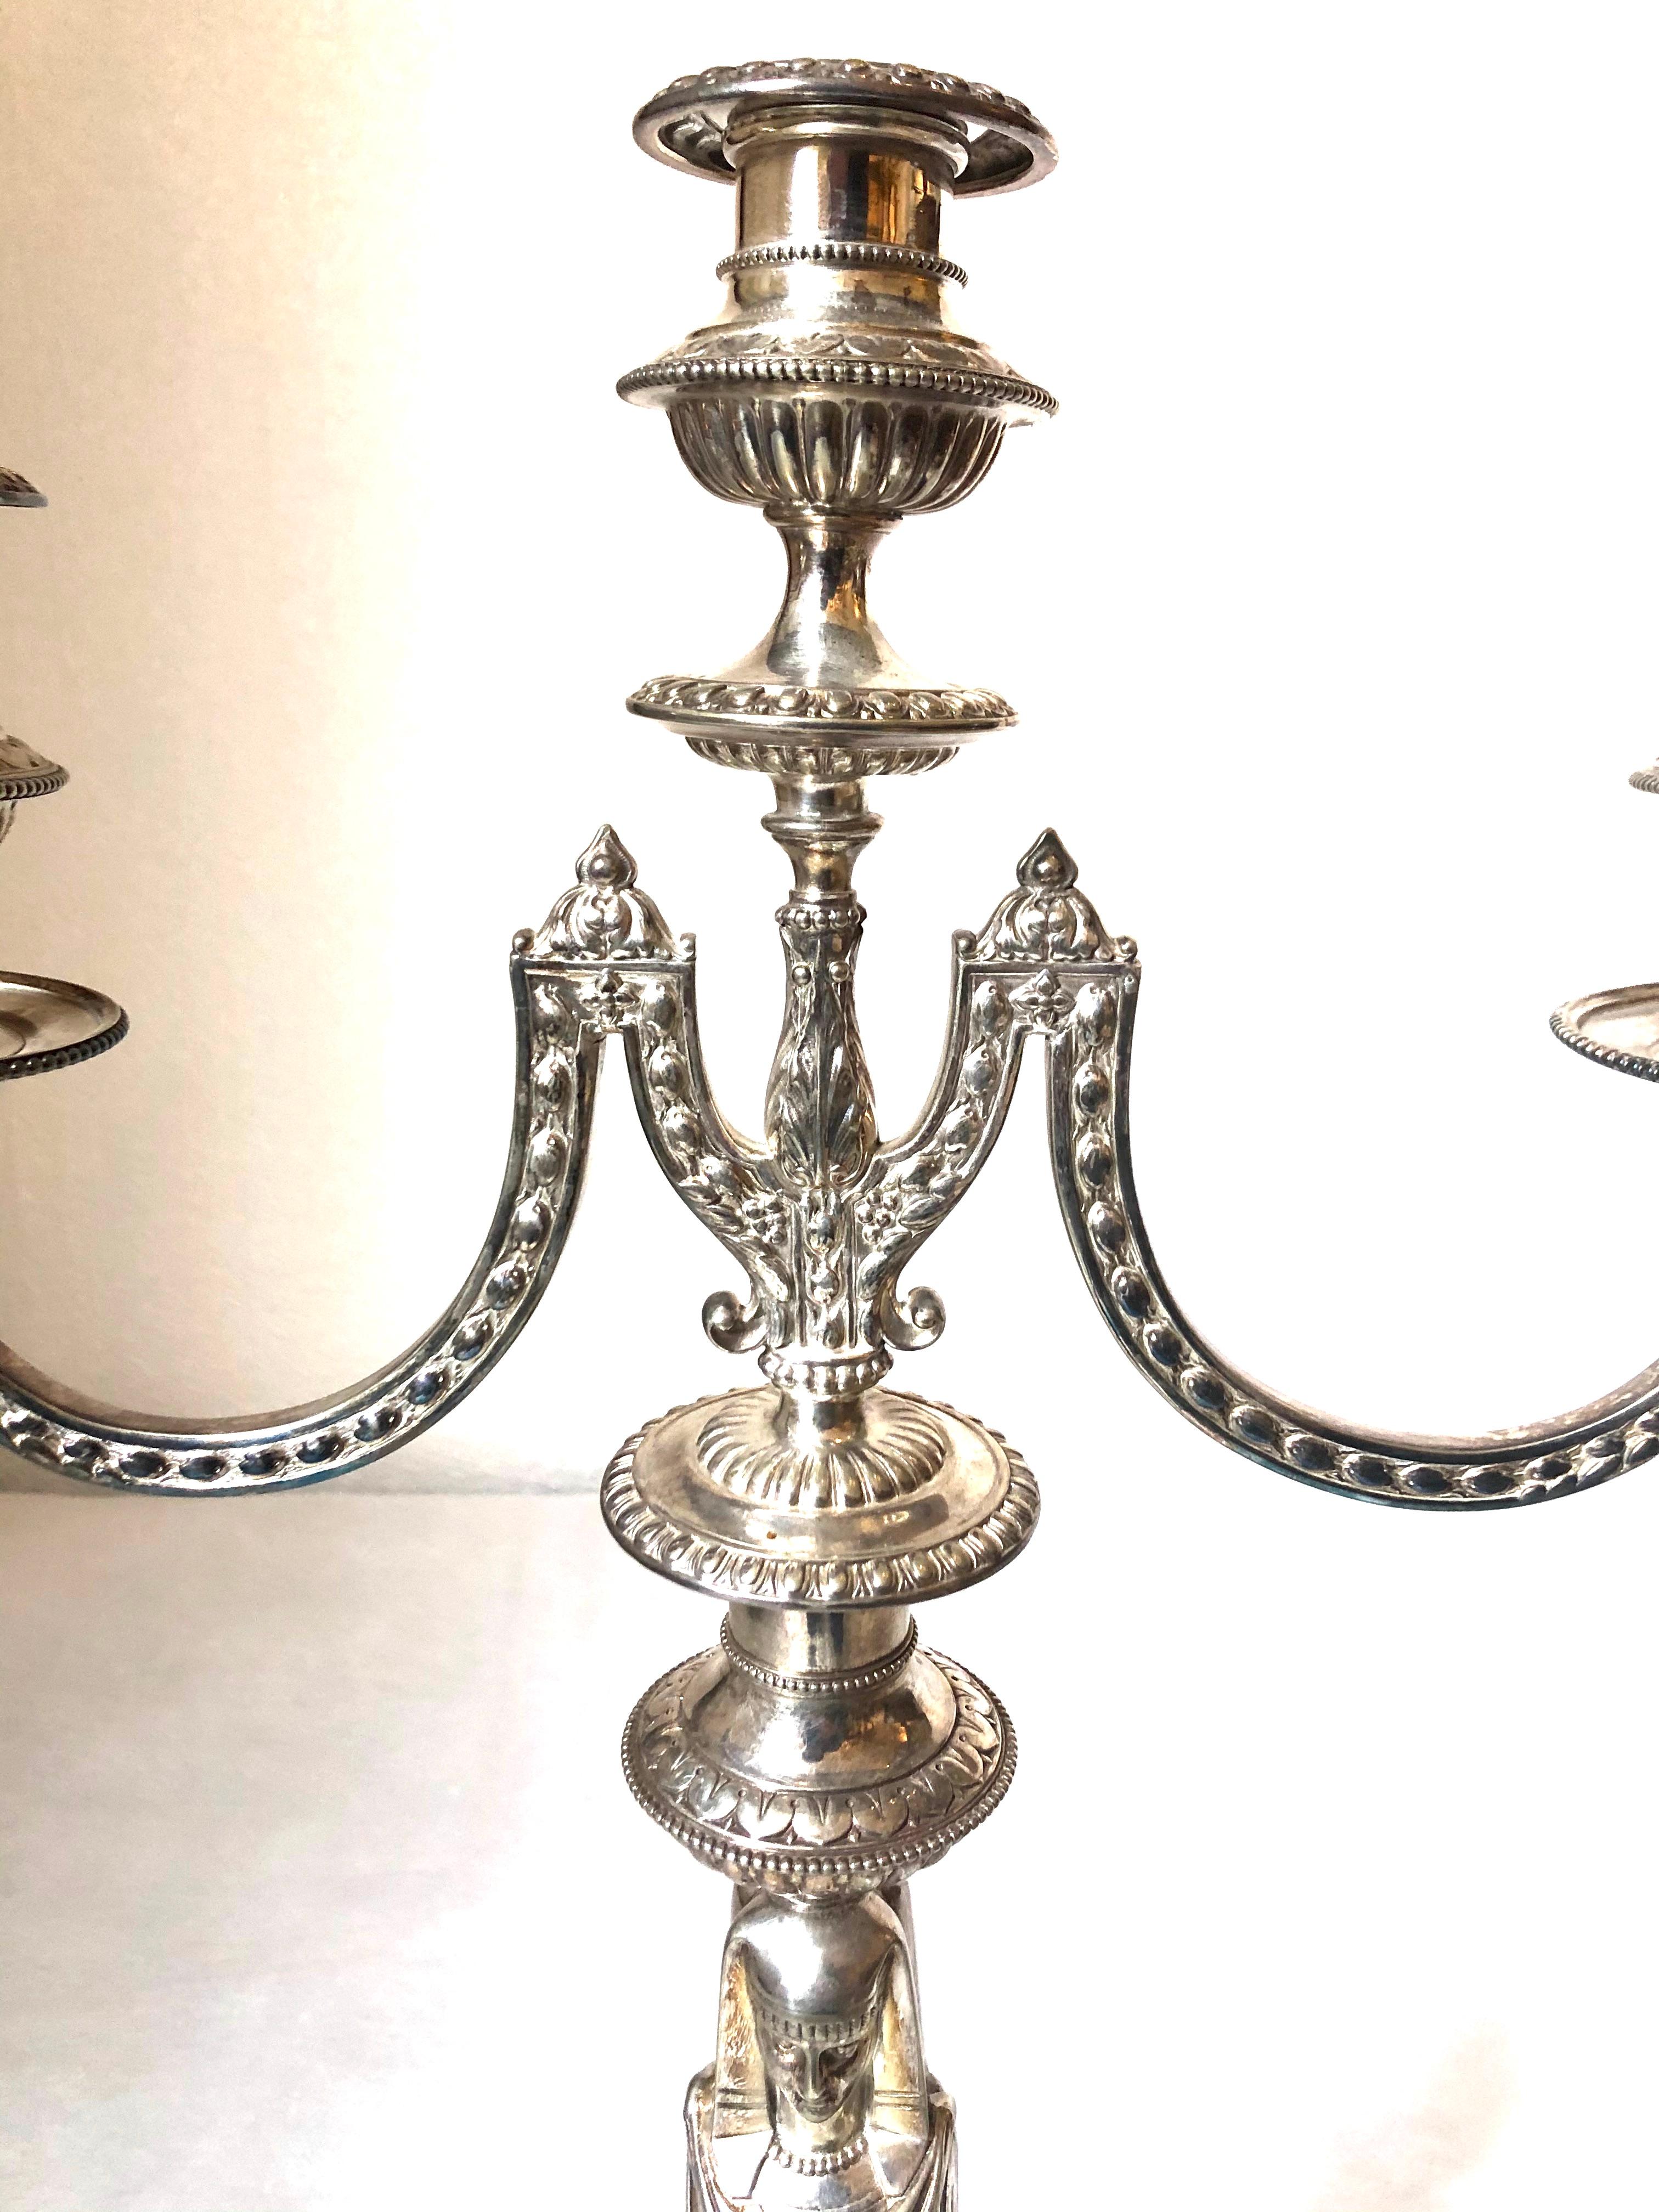 A pair of Victorian silver plated three-light candelabra, 1875

Lobed vase-shaped capitals with beaded borders and shield and dart rims on two leaf-capped out swept arms with husk decoration, issuing below a central light, the knopped stems formed